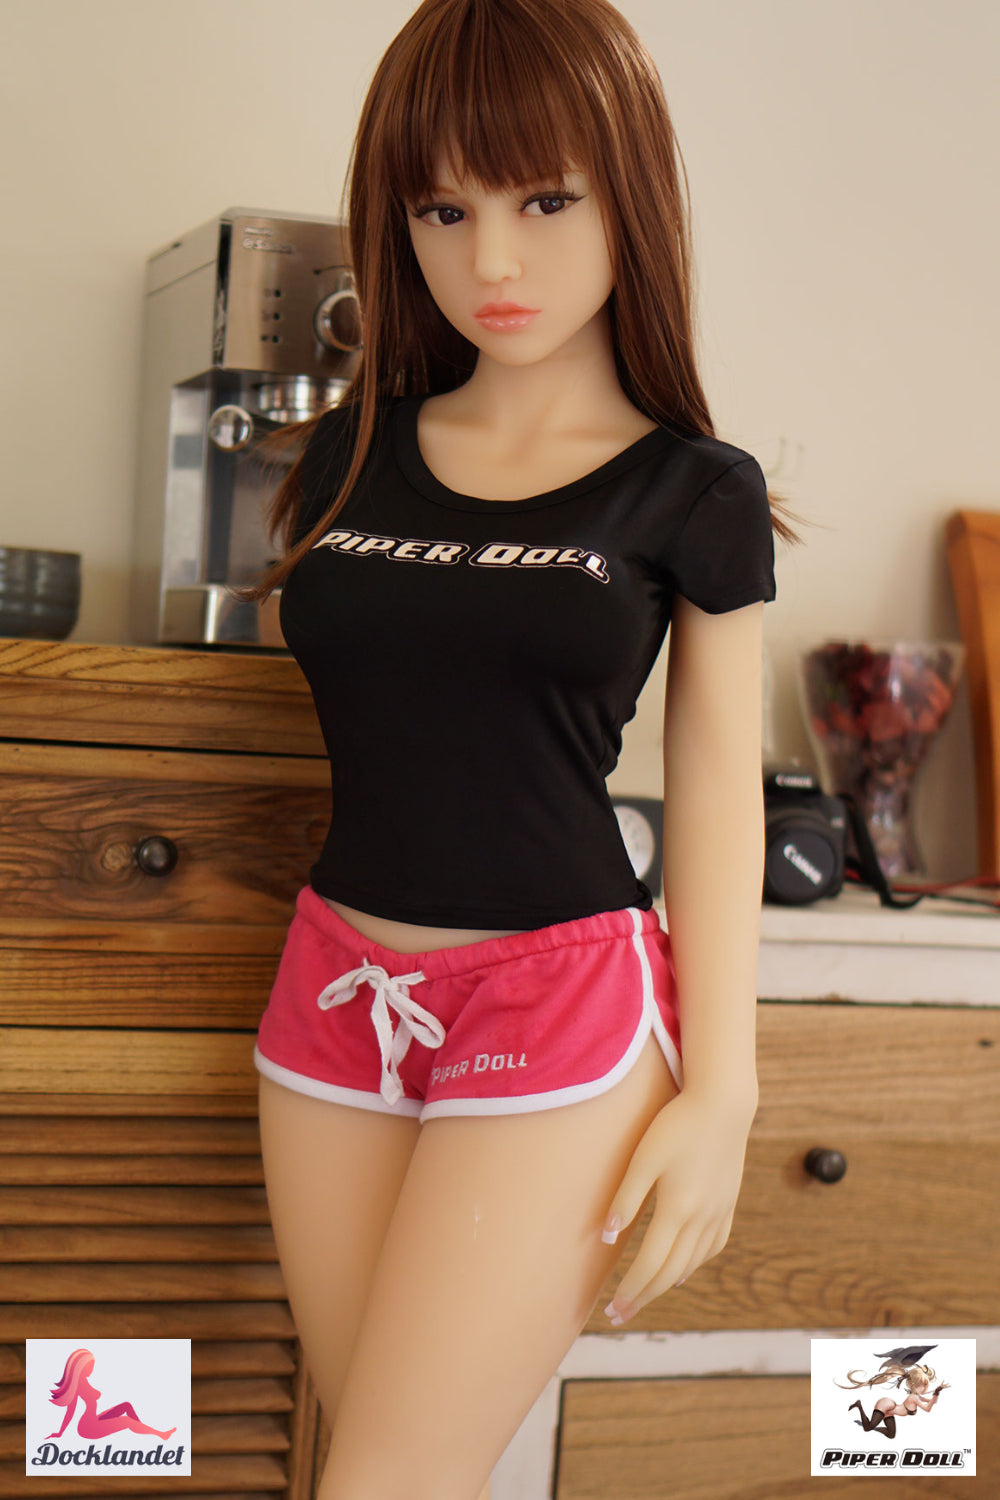 Phoebe (Piper Doll 130 cm D-Cup TPE)